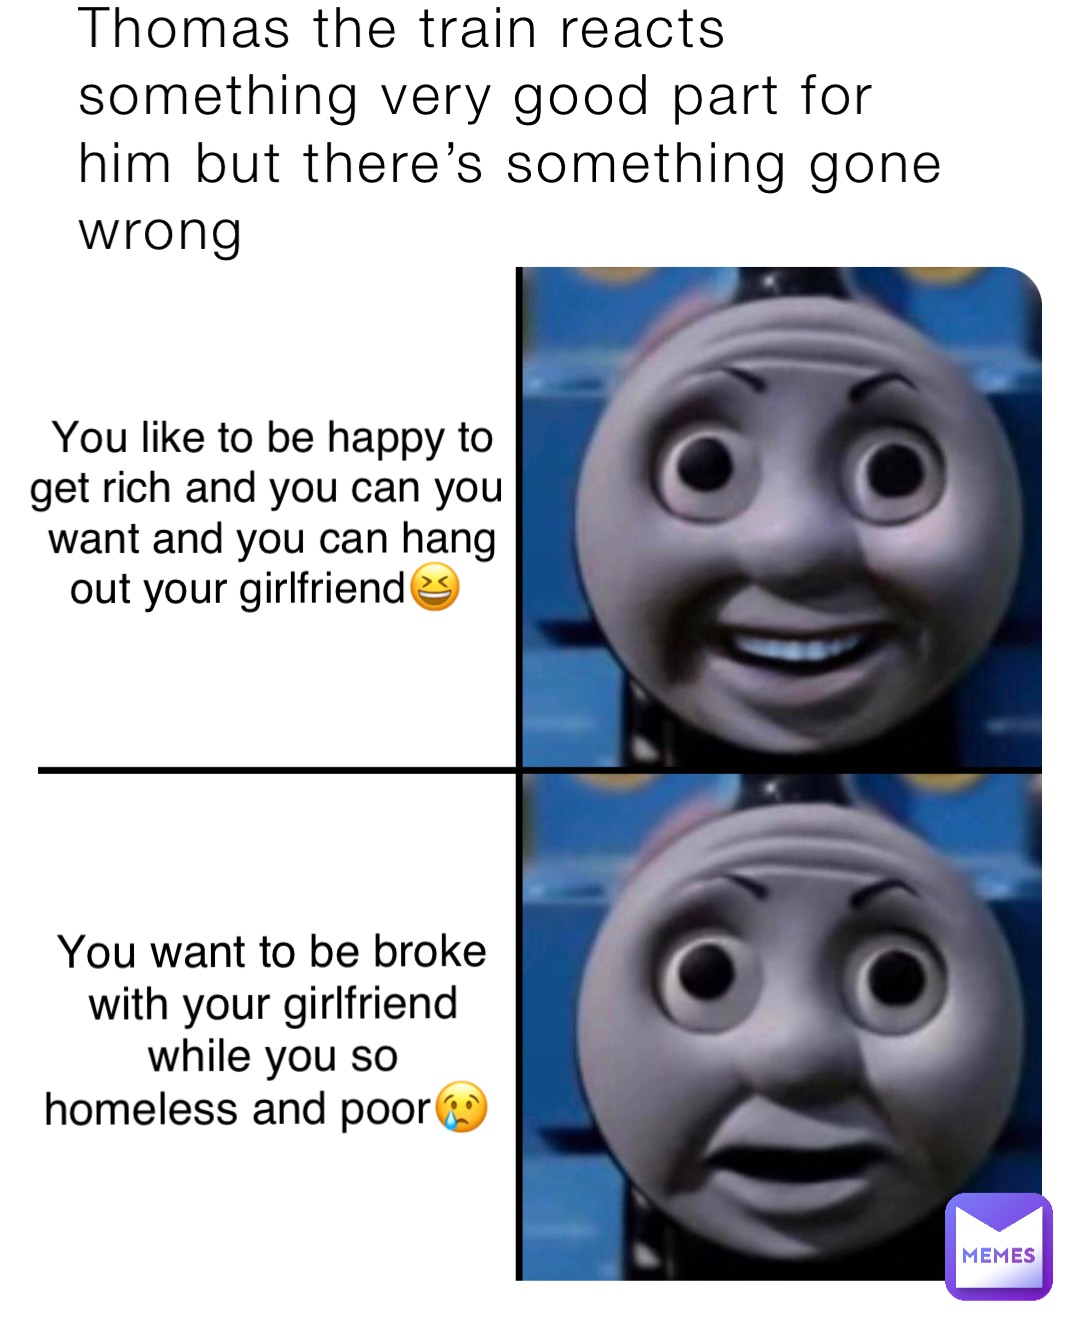 Thomas the train reacts something very good part for him but there’s something gone wrong You like to be happy to get rich and you can you want and you can hang out your girlfriend😆 You want to be broke with your girlfriend while you so homeless and poor😢